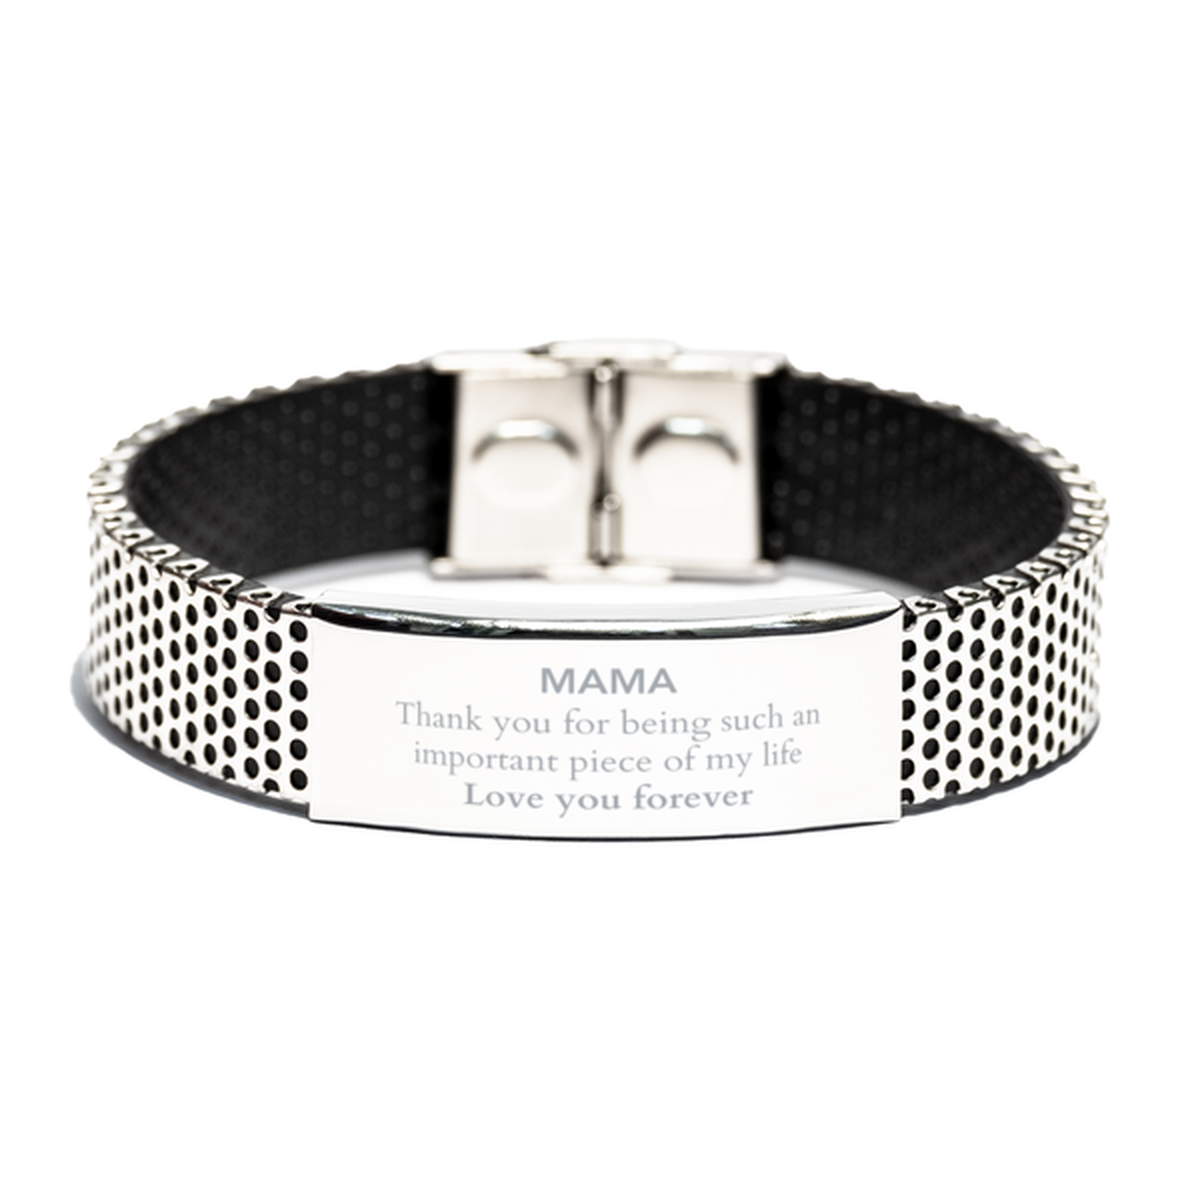 Appropriate Mama Stainless Steel Bracelet Epic Birthday Gifts for Mama Thank you for being such an important piece of my life Mama Christmas Mothers Fathers Day